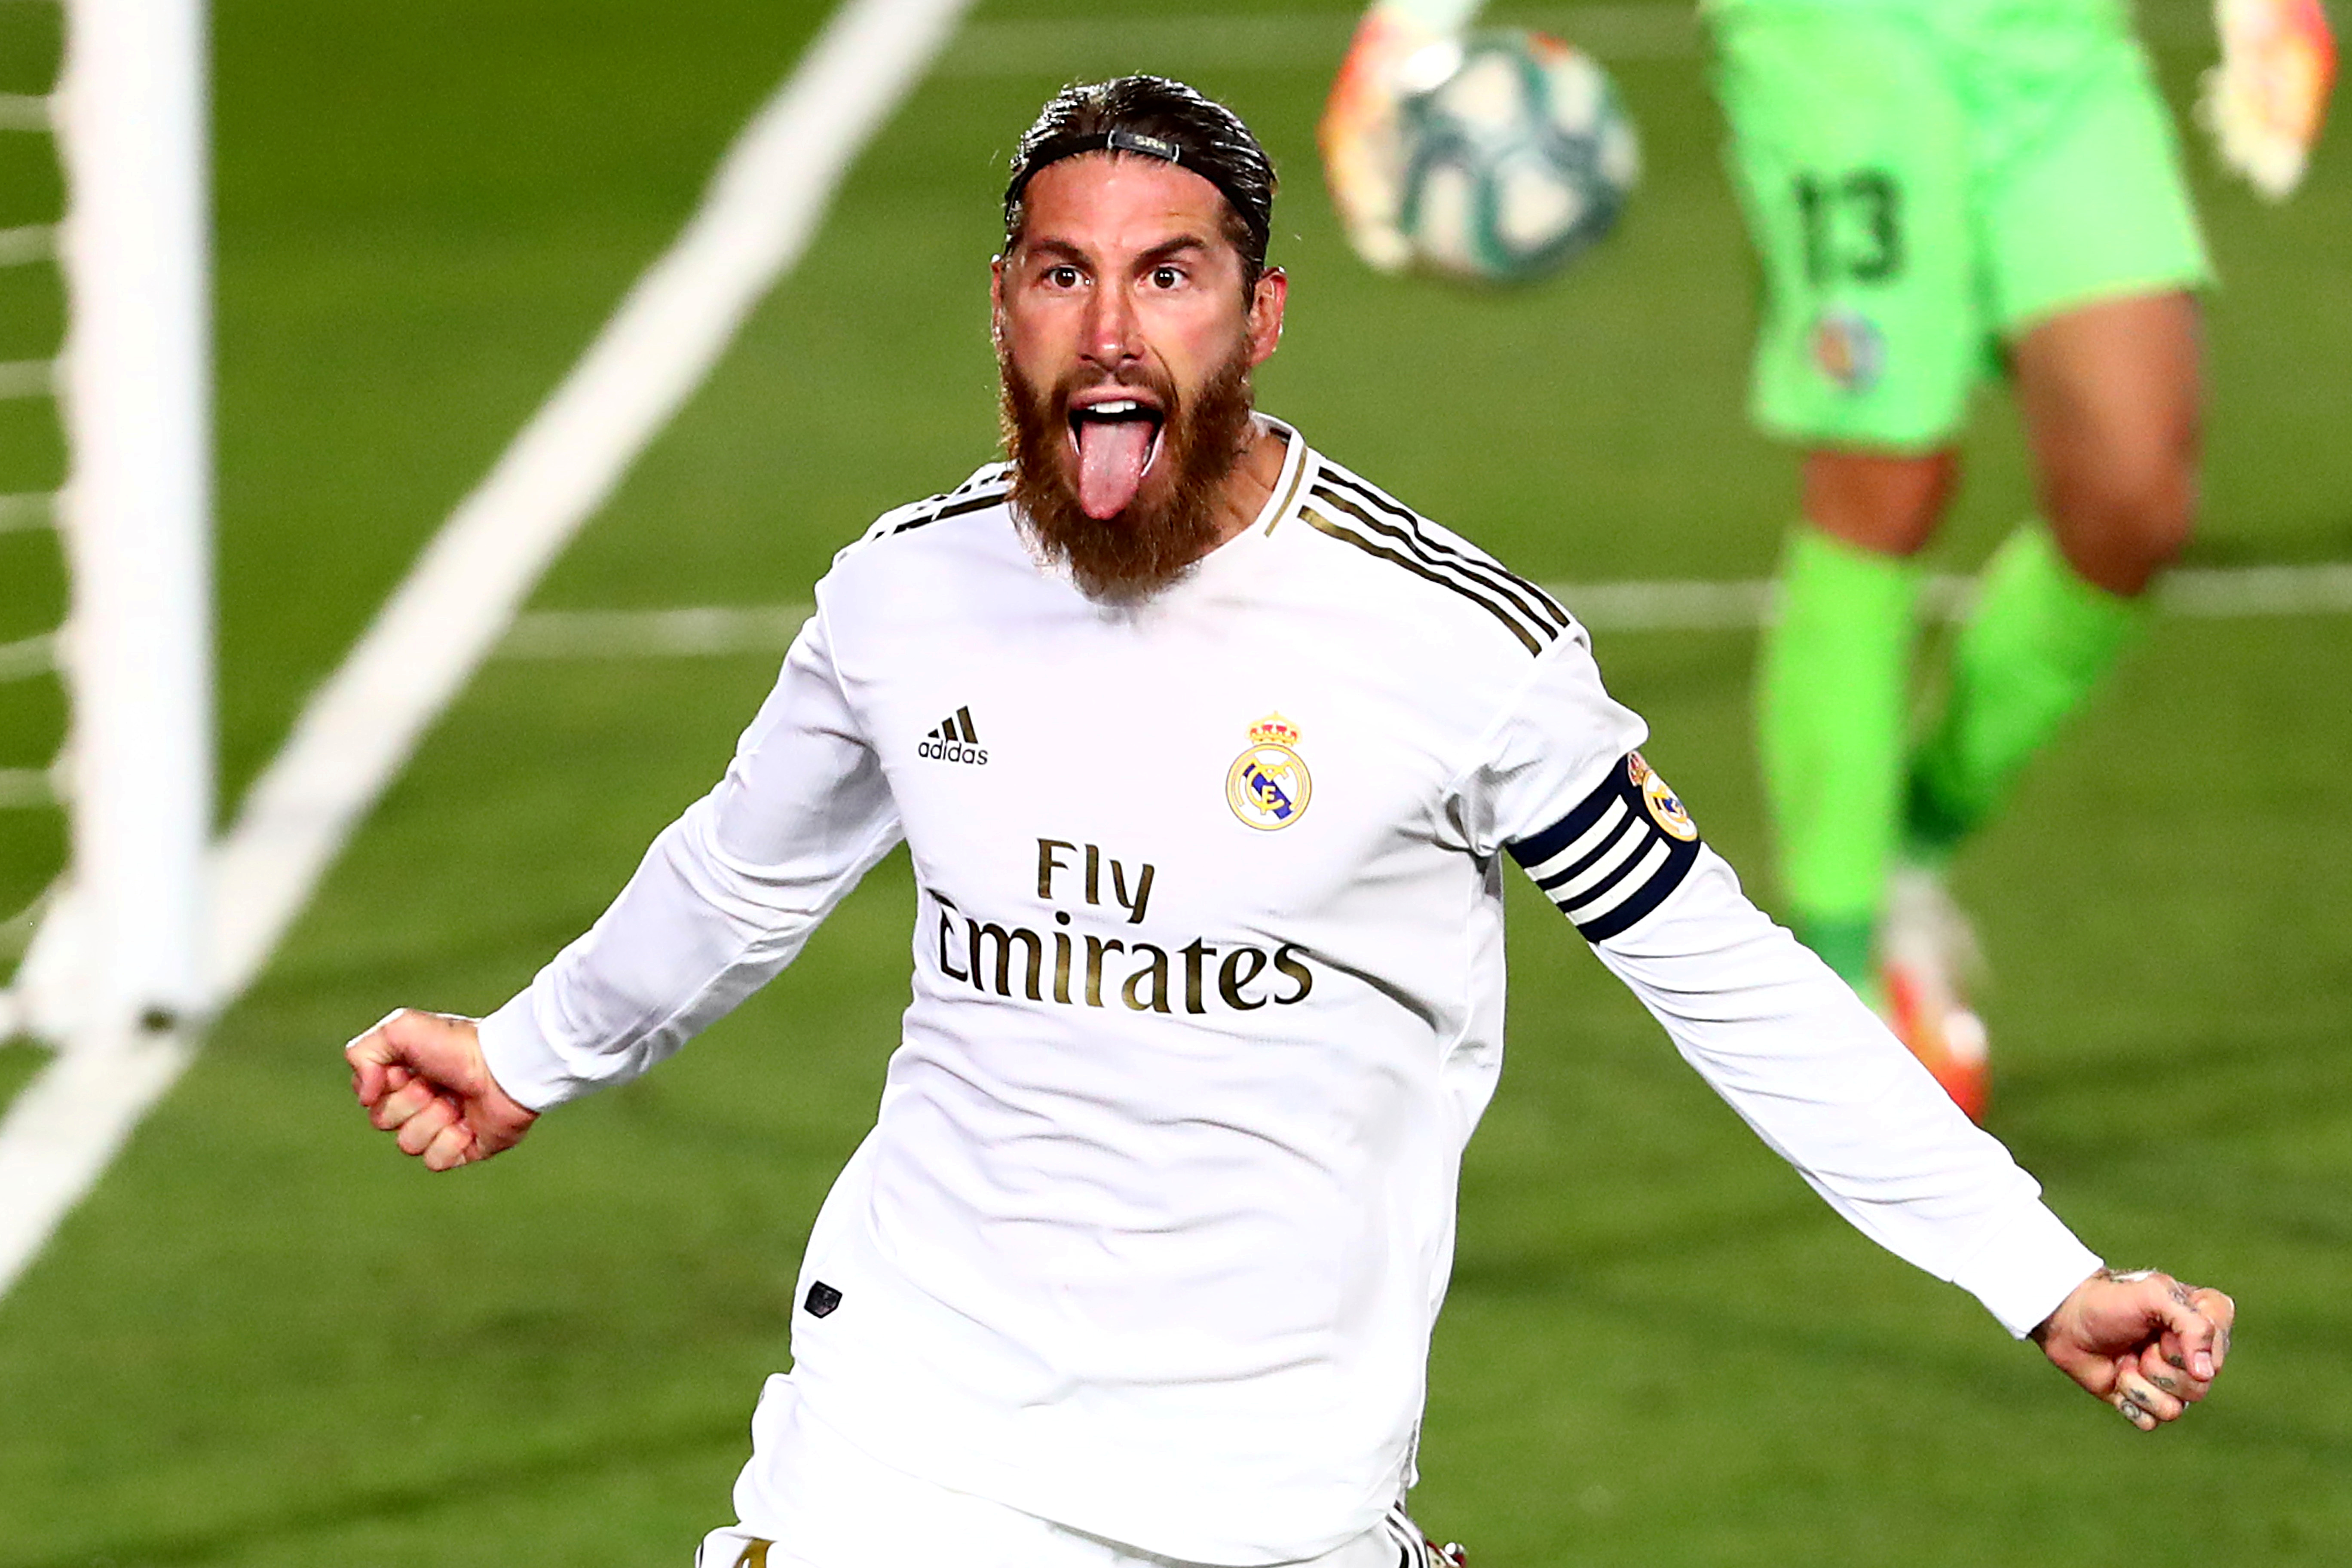 Real Madrid's Sergio Ramos celebrates scoring their first goal, as play resumes behind closed doors following the outbreak of the coronavirus disease (COVID-19) during the La Liga Santander match between Real Madrid and Getafe, at Alfredo Di Stefano Stadium, in Madrid, Spain, on July 2, 2020. Photo: Retuers